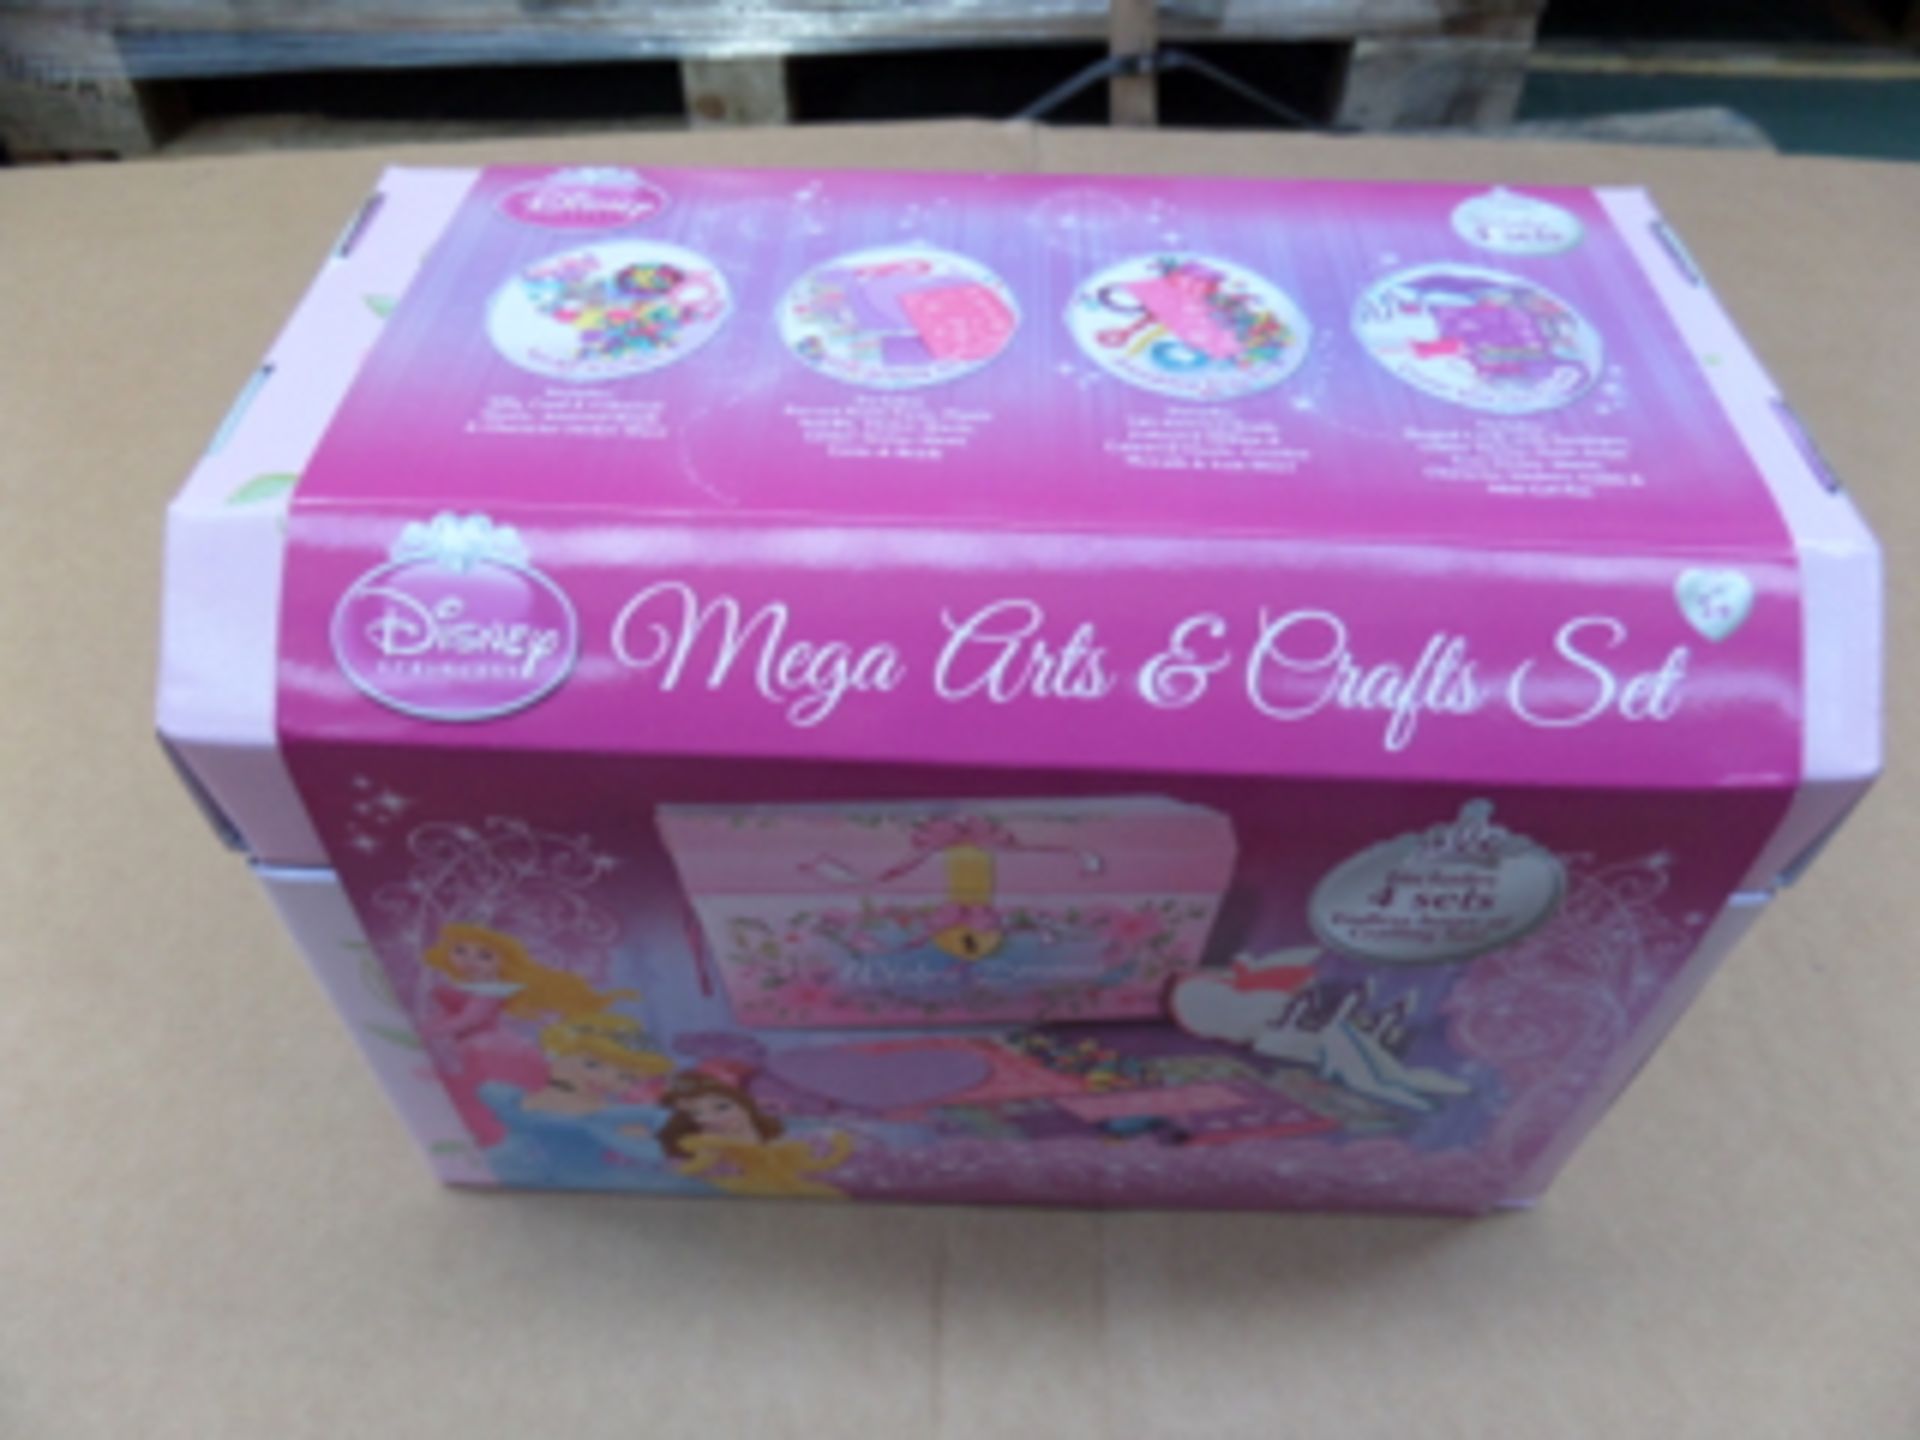 8 x Disney Princess Mega arts and Crafts sets. Includes 4 Sets. Endless hours of crafting fun!